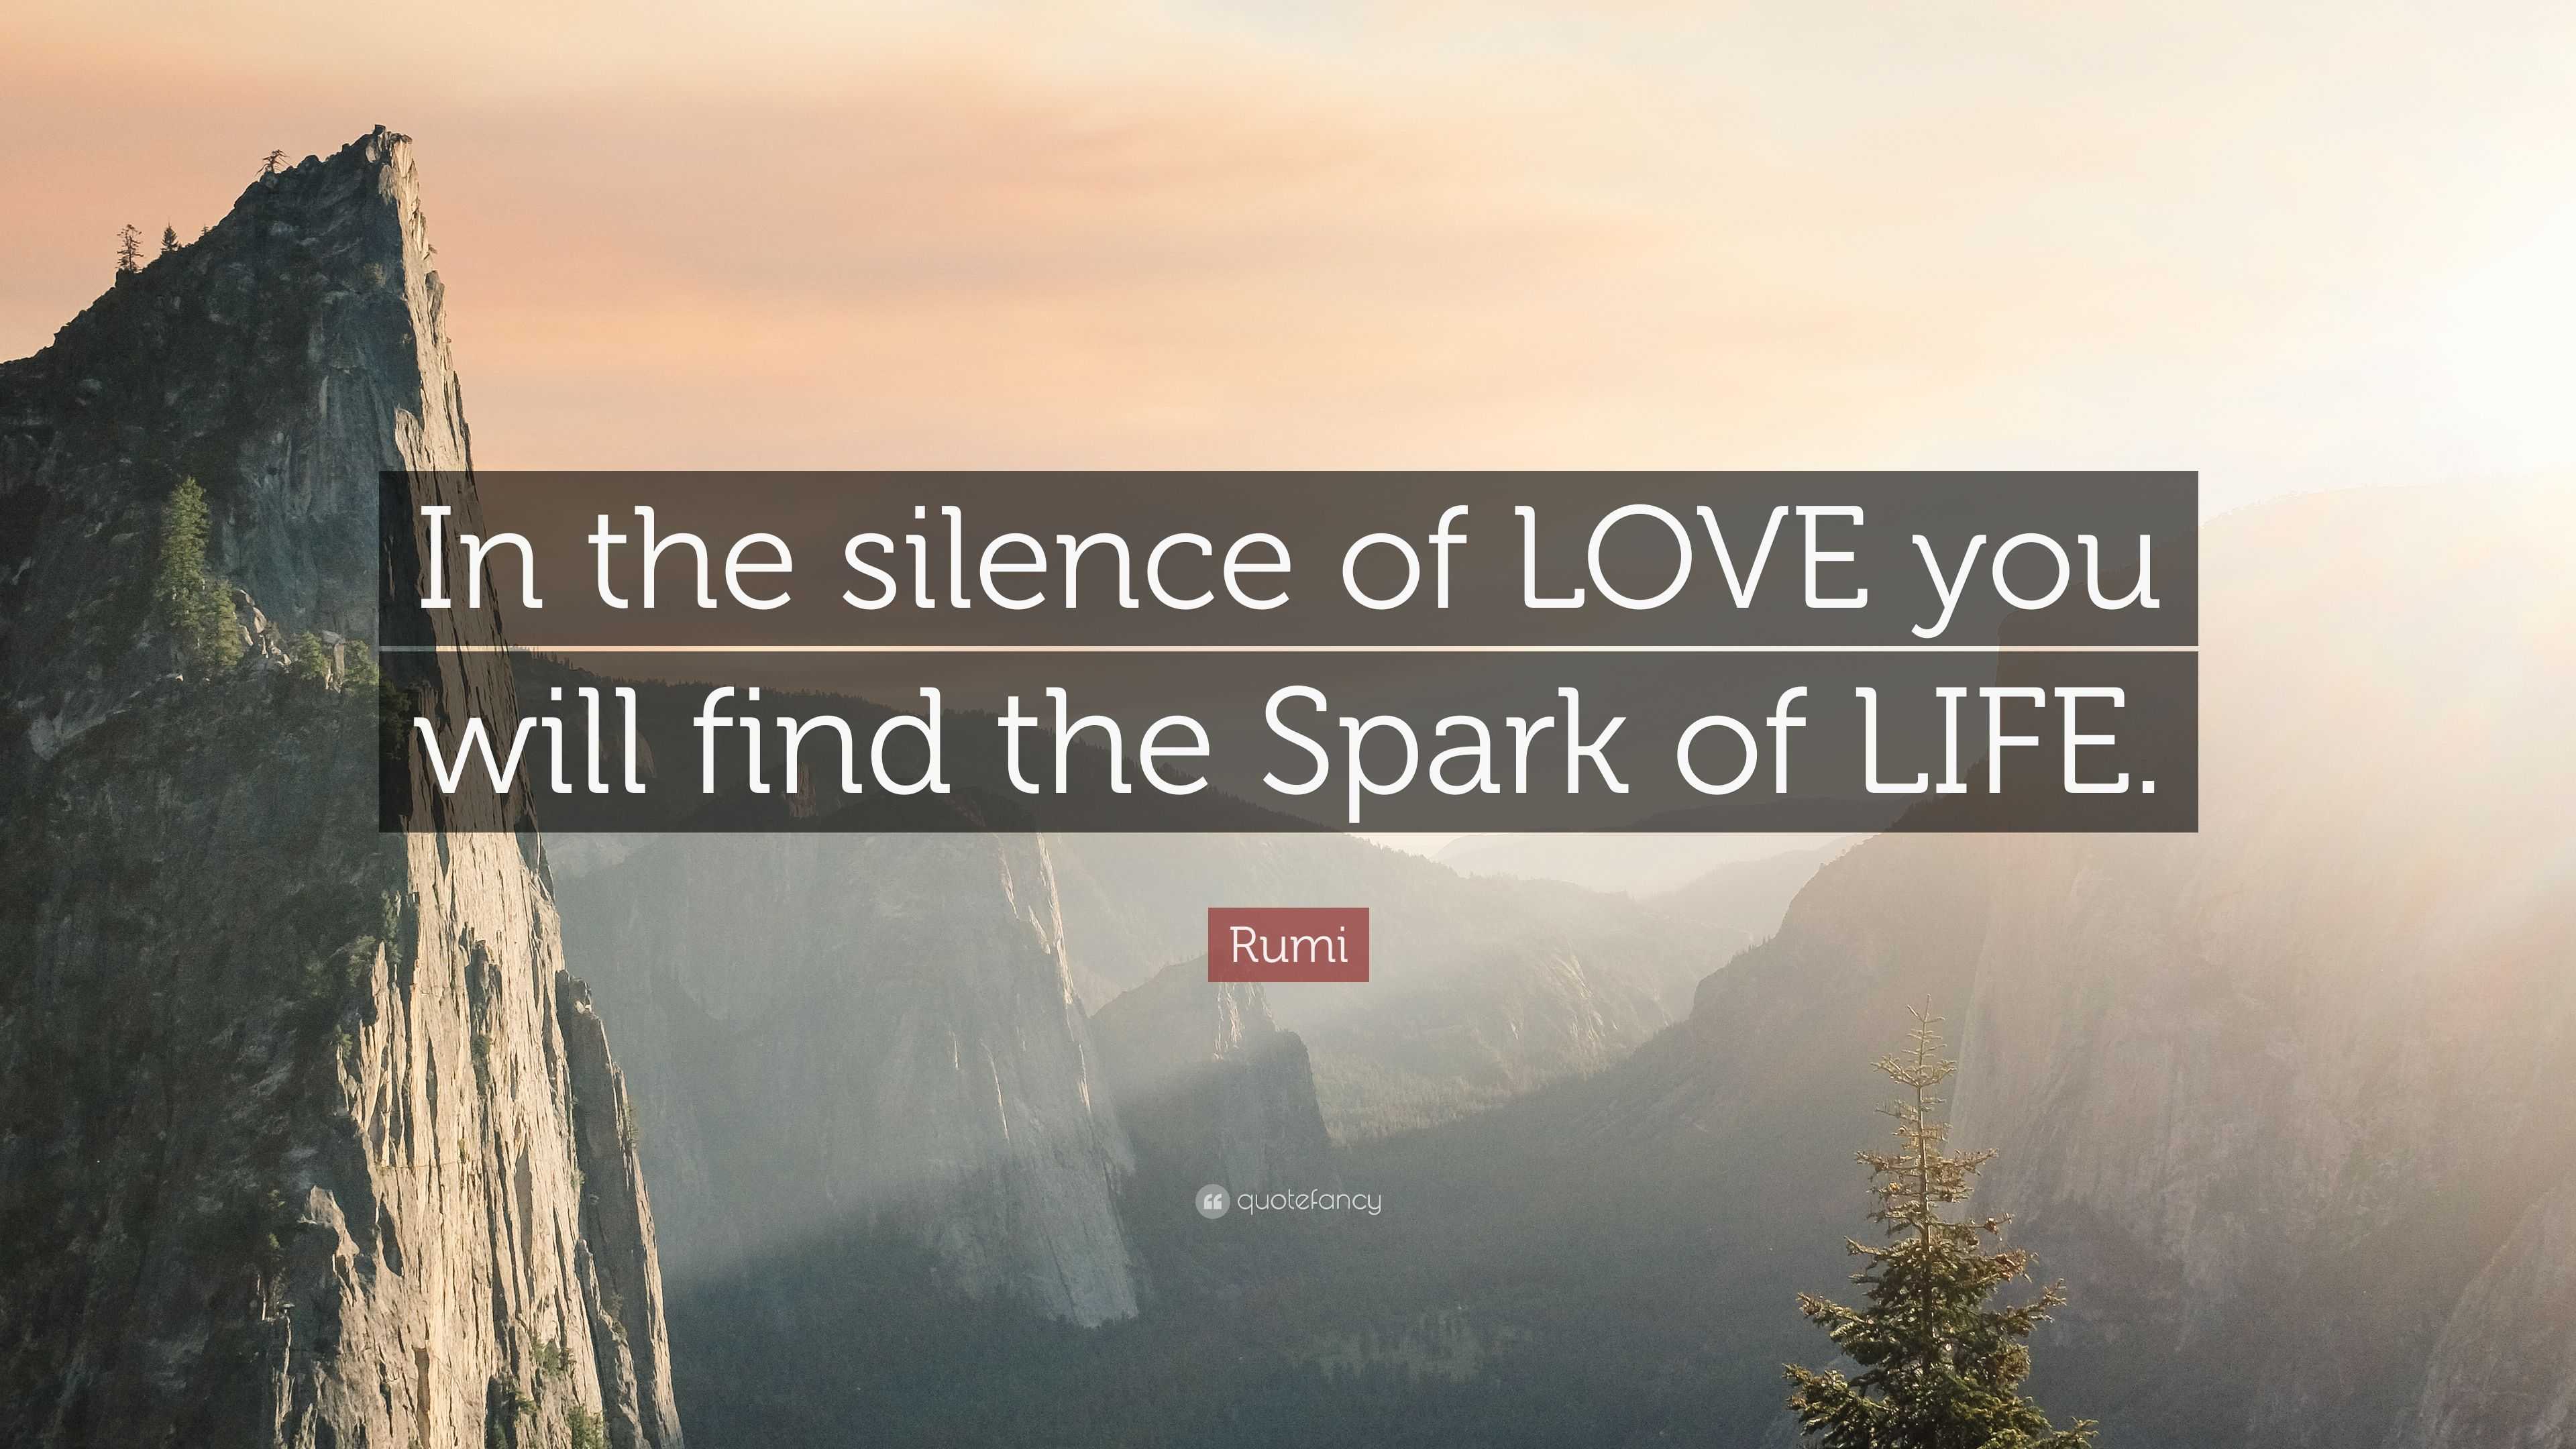 2039559 Rumi Quote In The Silence Of LOVE You Will Find The Spark Of LIFE 